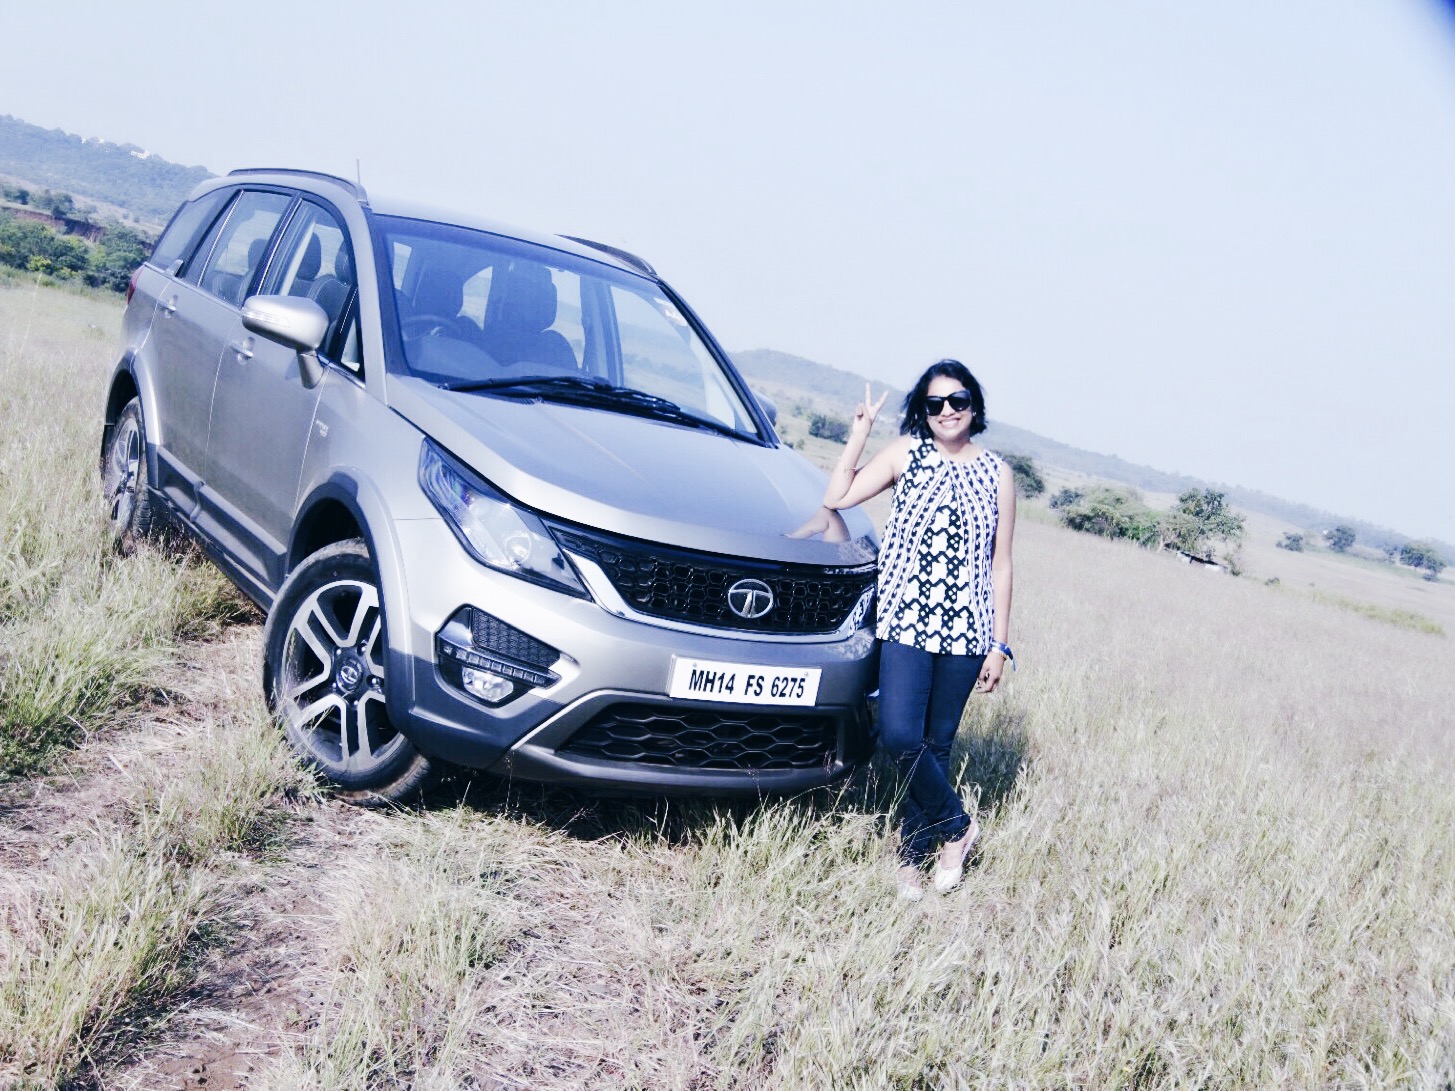 Posing with the Hexa in the grasslands